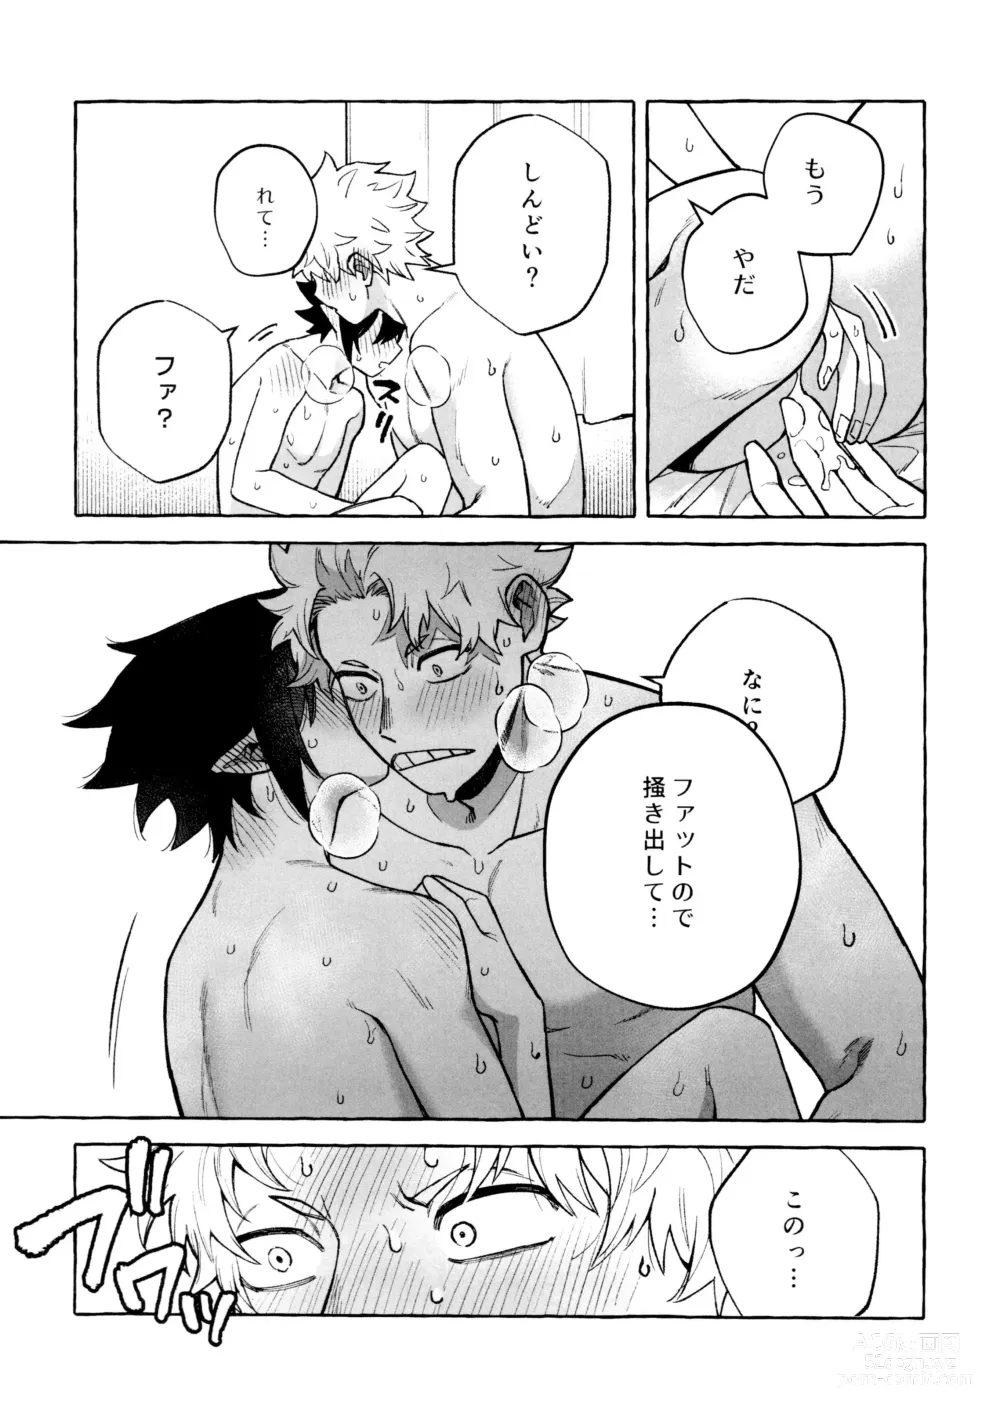 Page 29 of doujinshi Please please